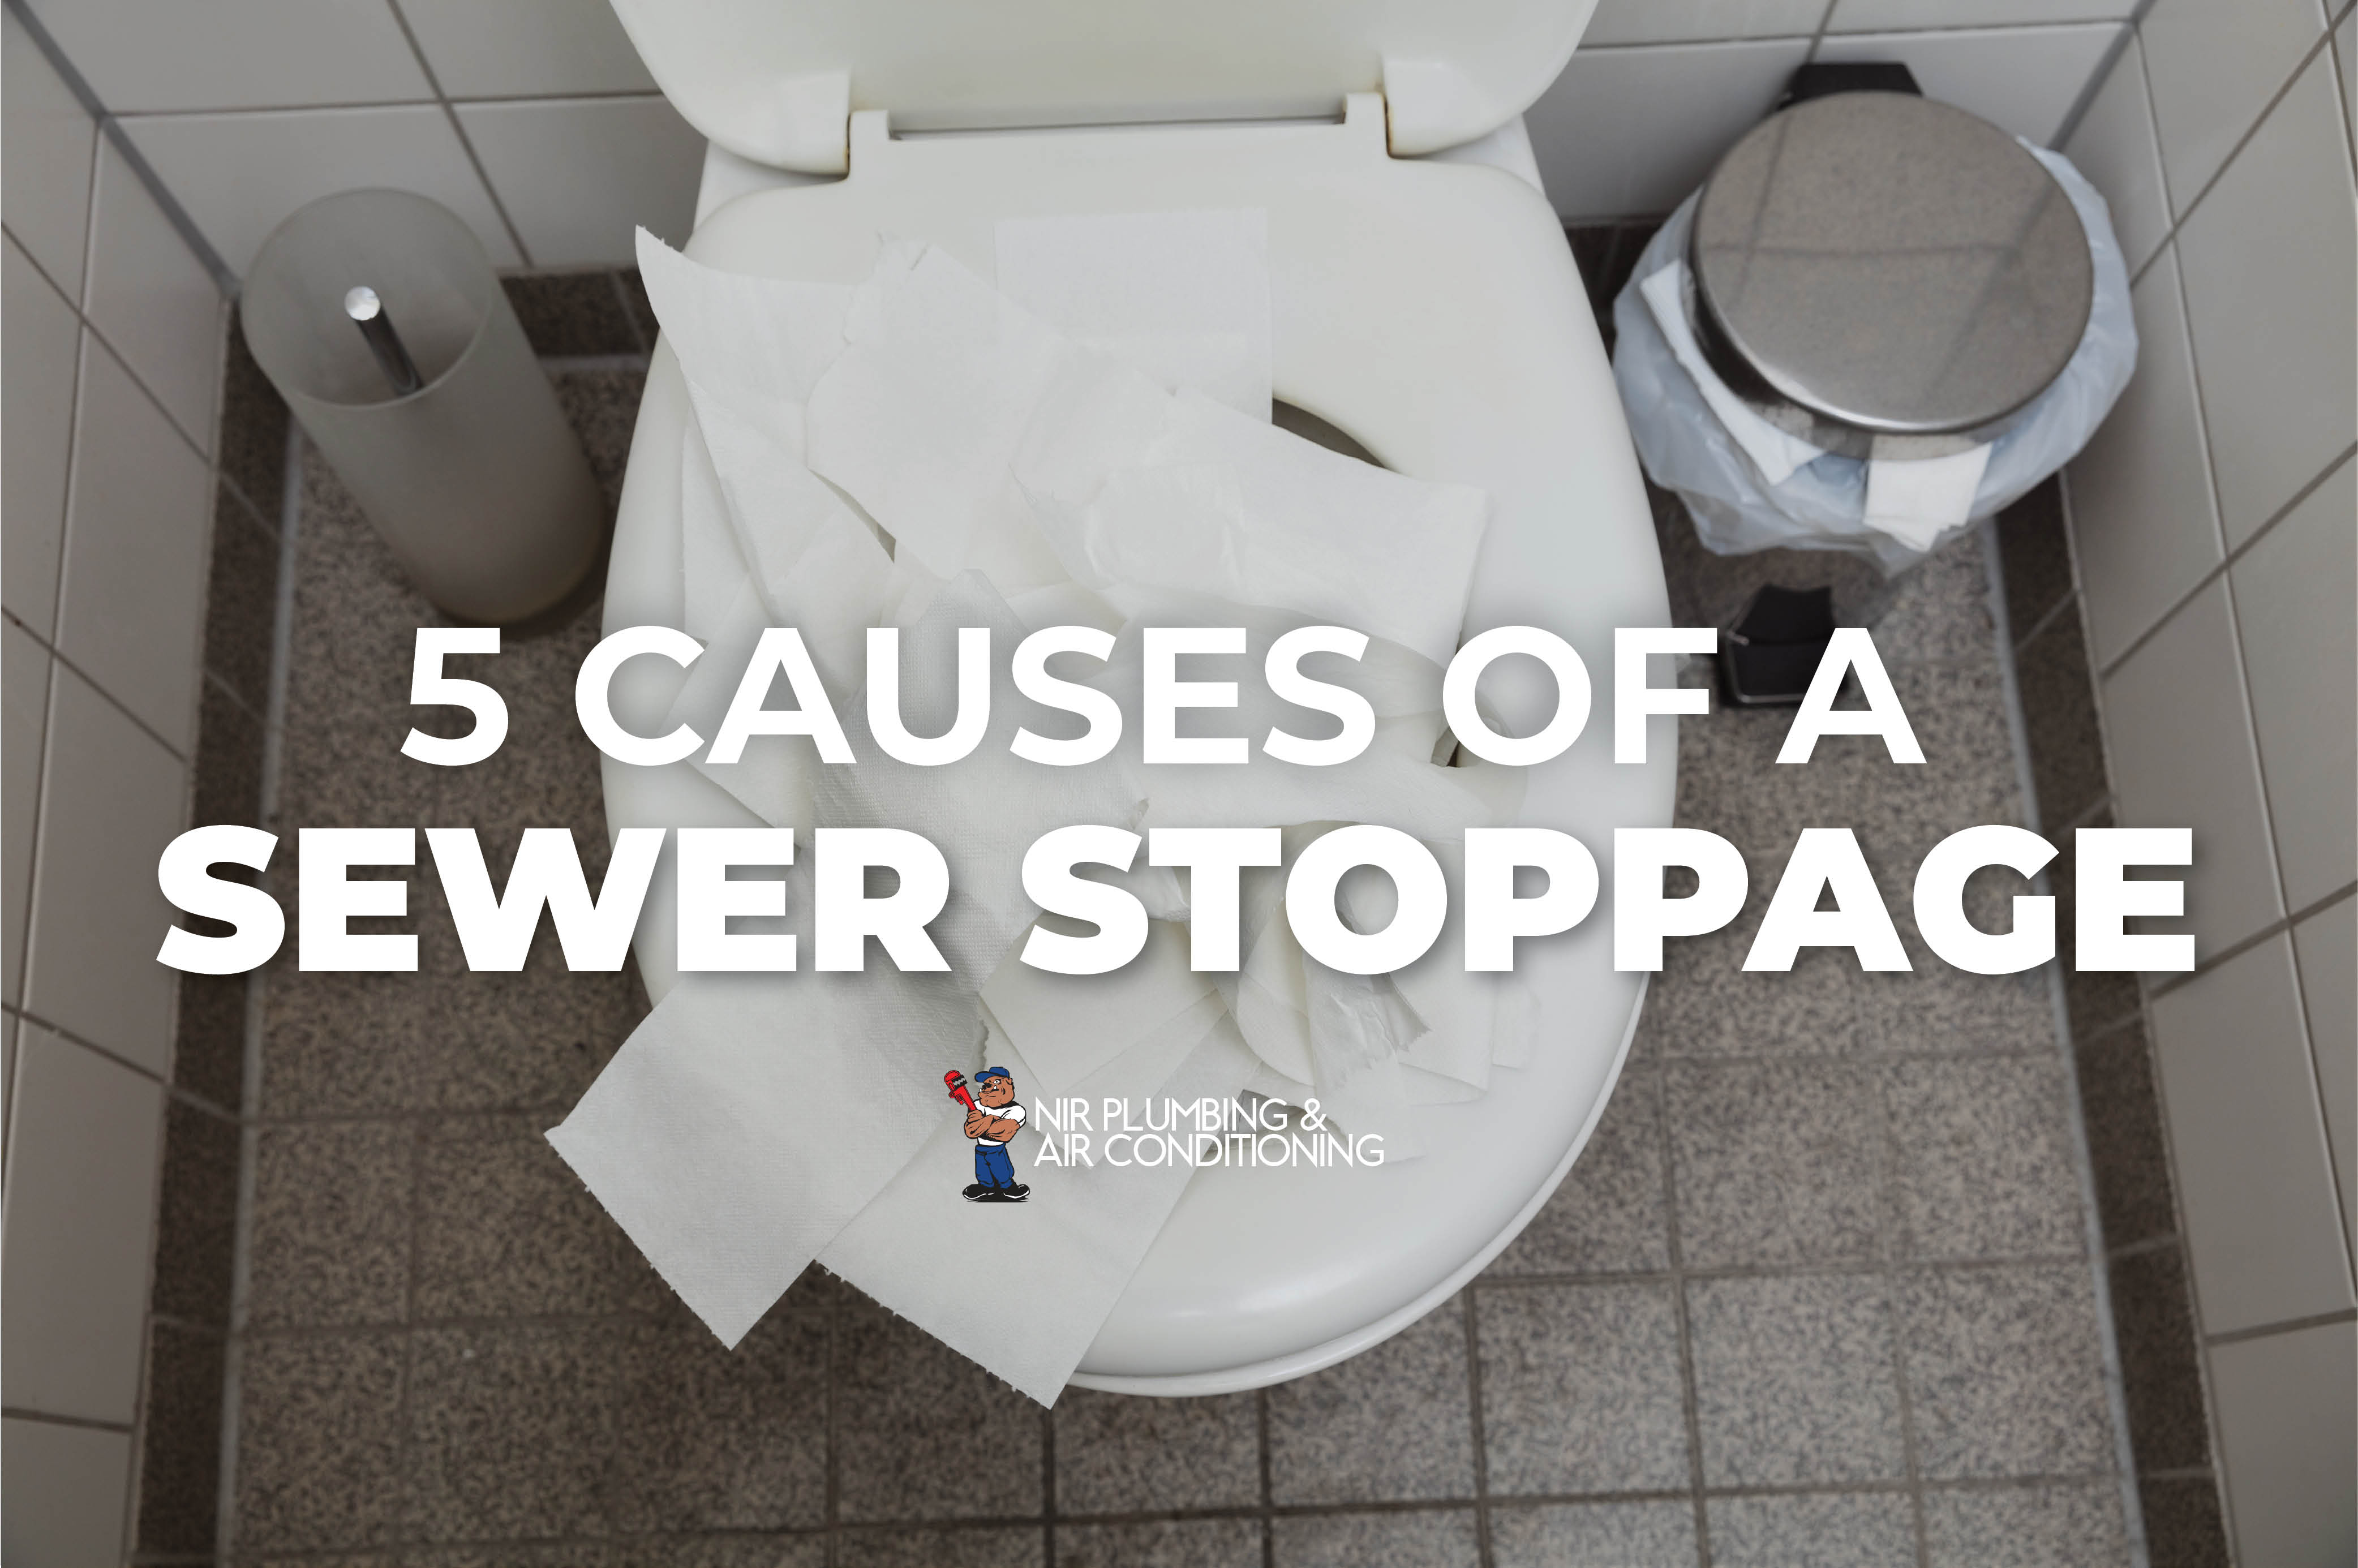 5 Causes of a Sewer Stoppage